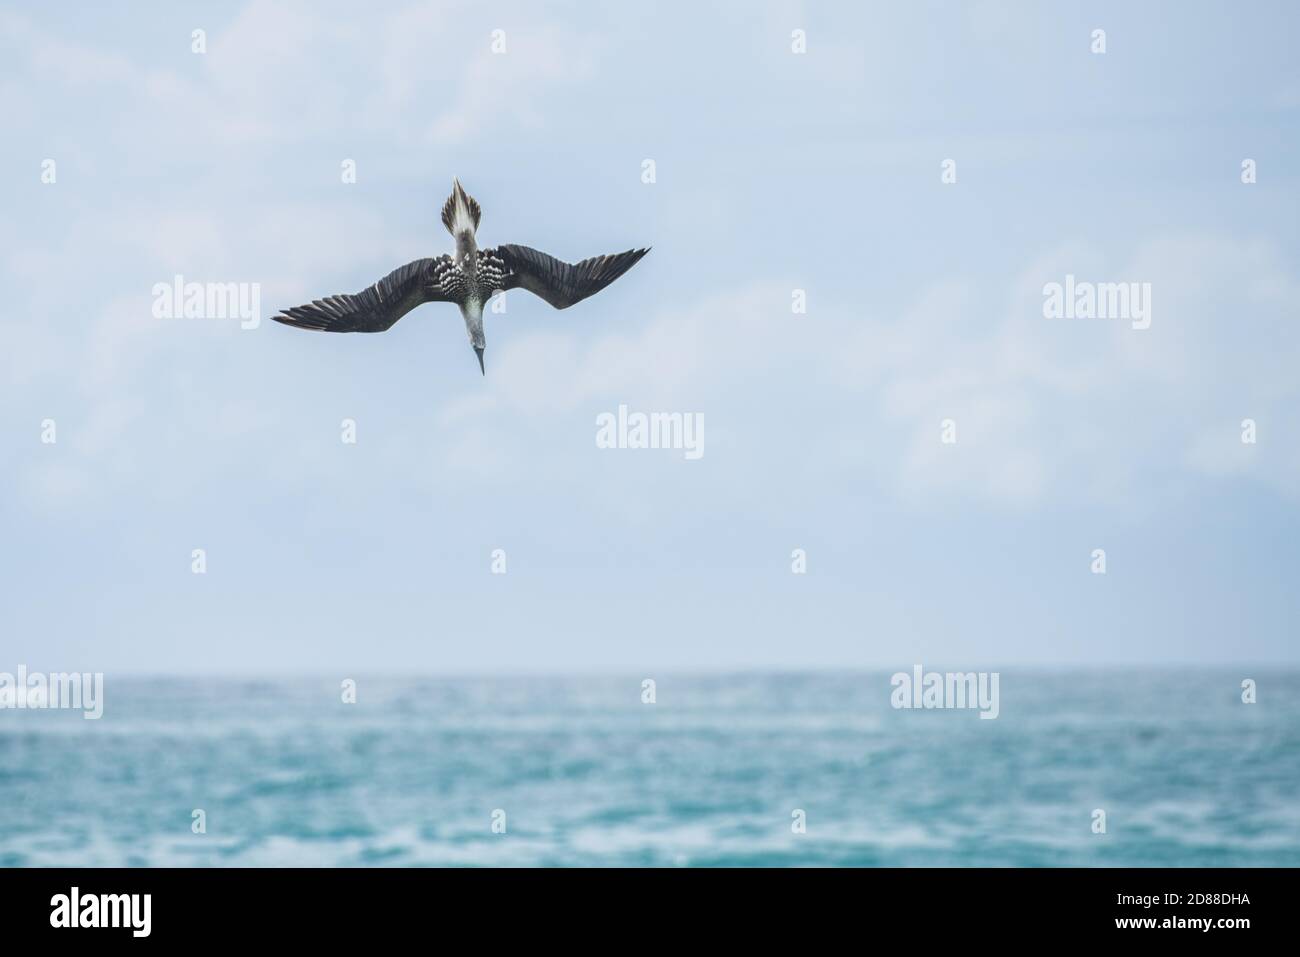 A blue footed booby (Sula nebouxii) takes a high speed dive into the ocean in pursuit of fish in the Galapagos islands of Ecuador. Stock Photo